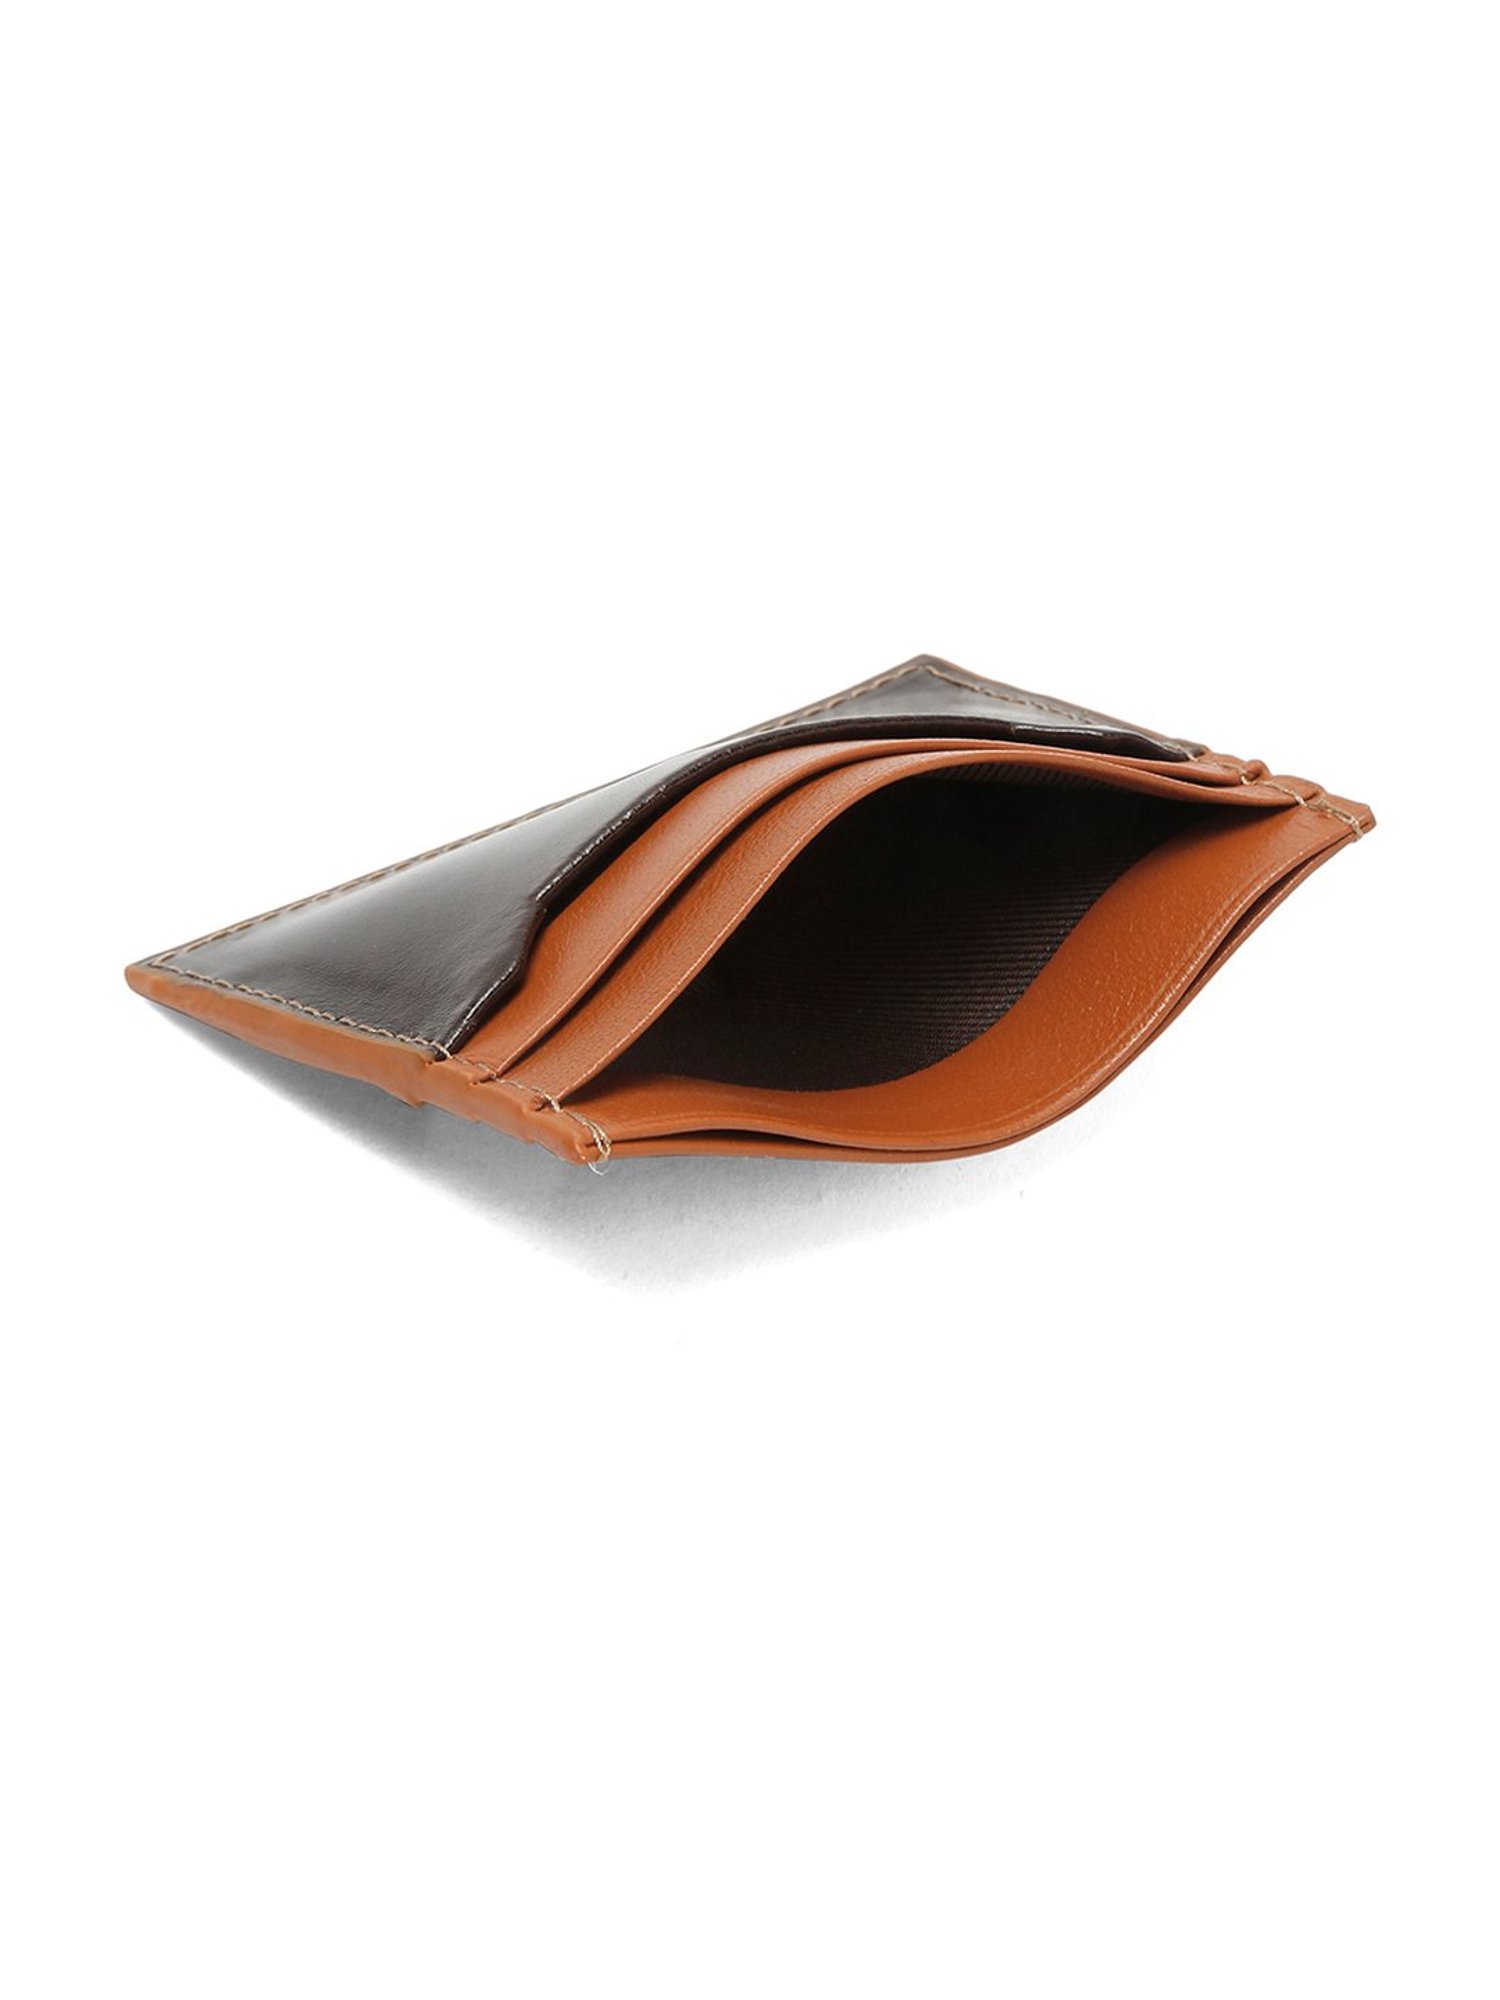 Buy Teakwood Leathers Brown Leather Card Holder at Best Price @ Tata CLiQ